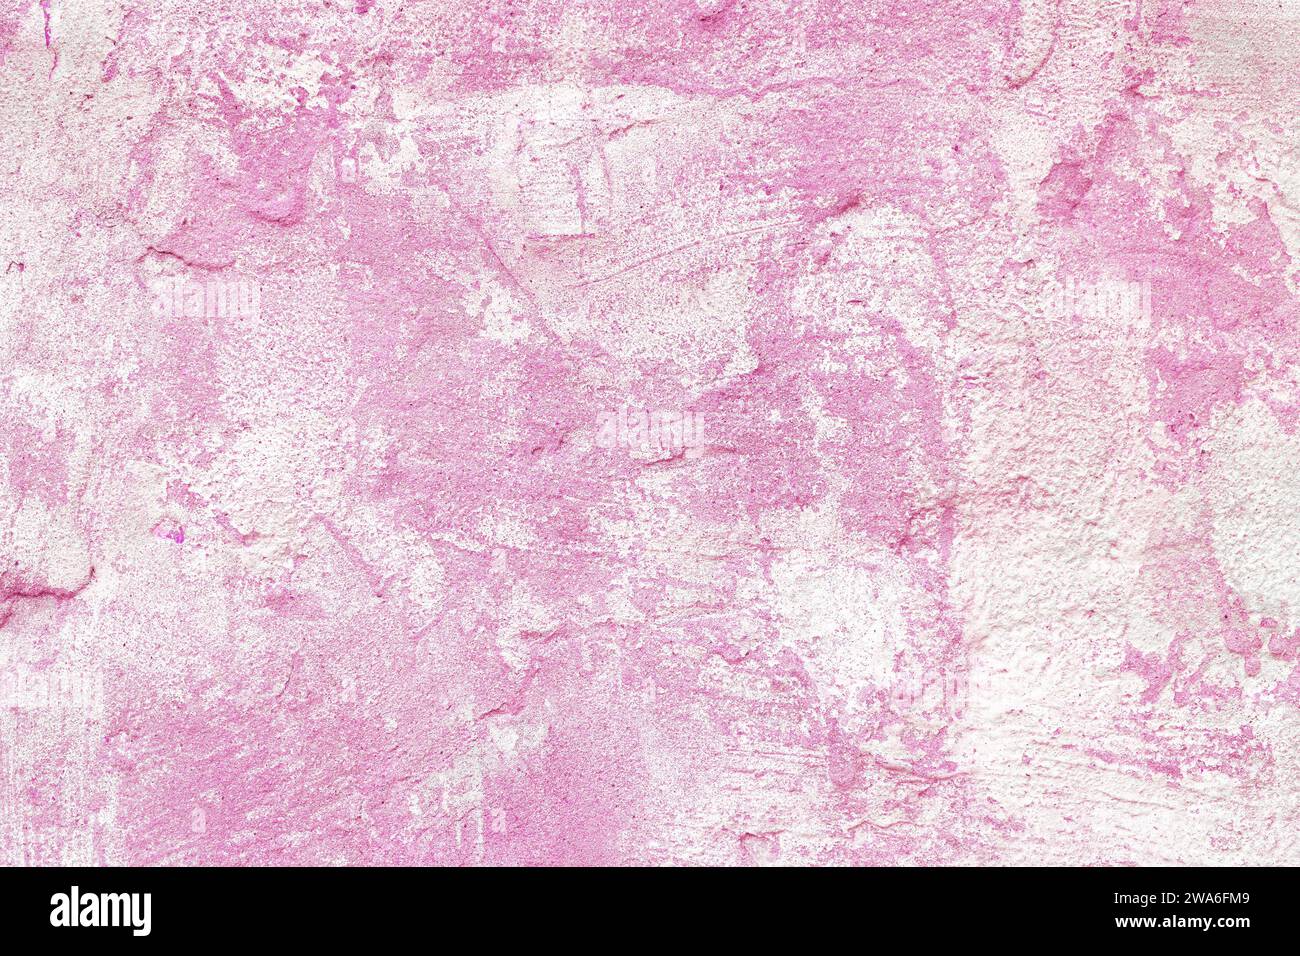 Vintage, old stucco plaster surface background, close up rough texture of pink and white mixed color painted cement, concrete wall texture. Wallpaper, Stock Photo